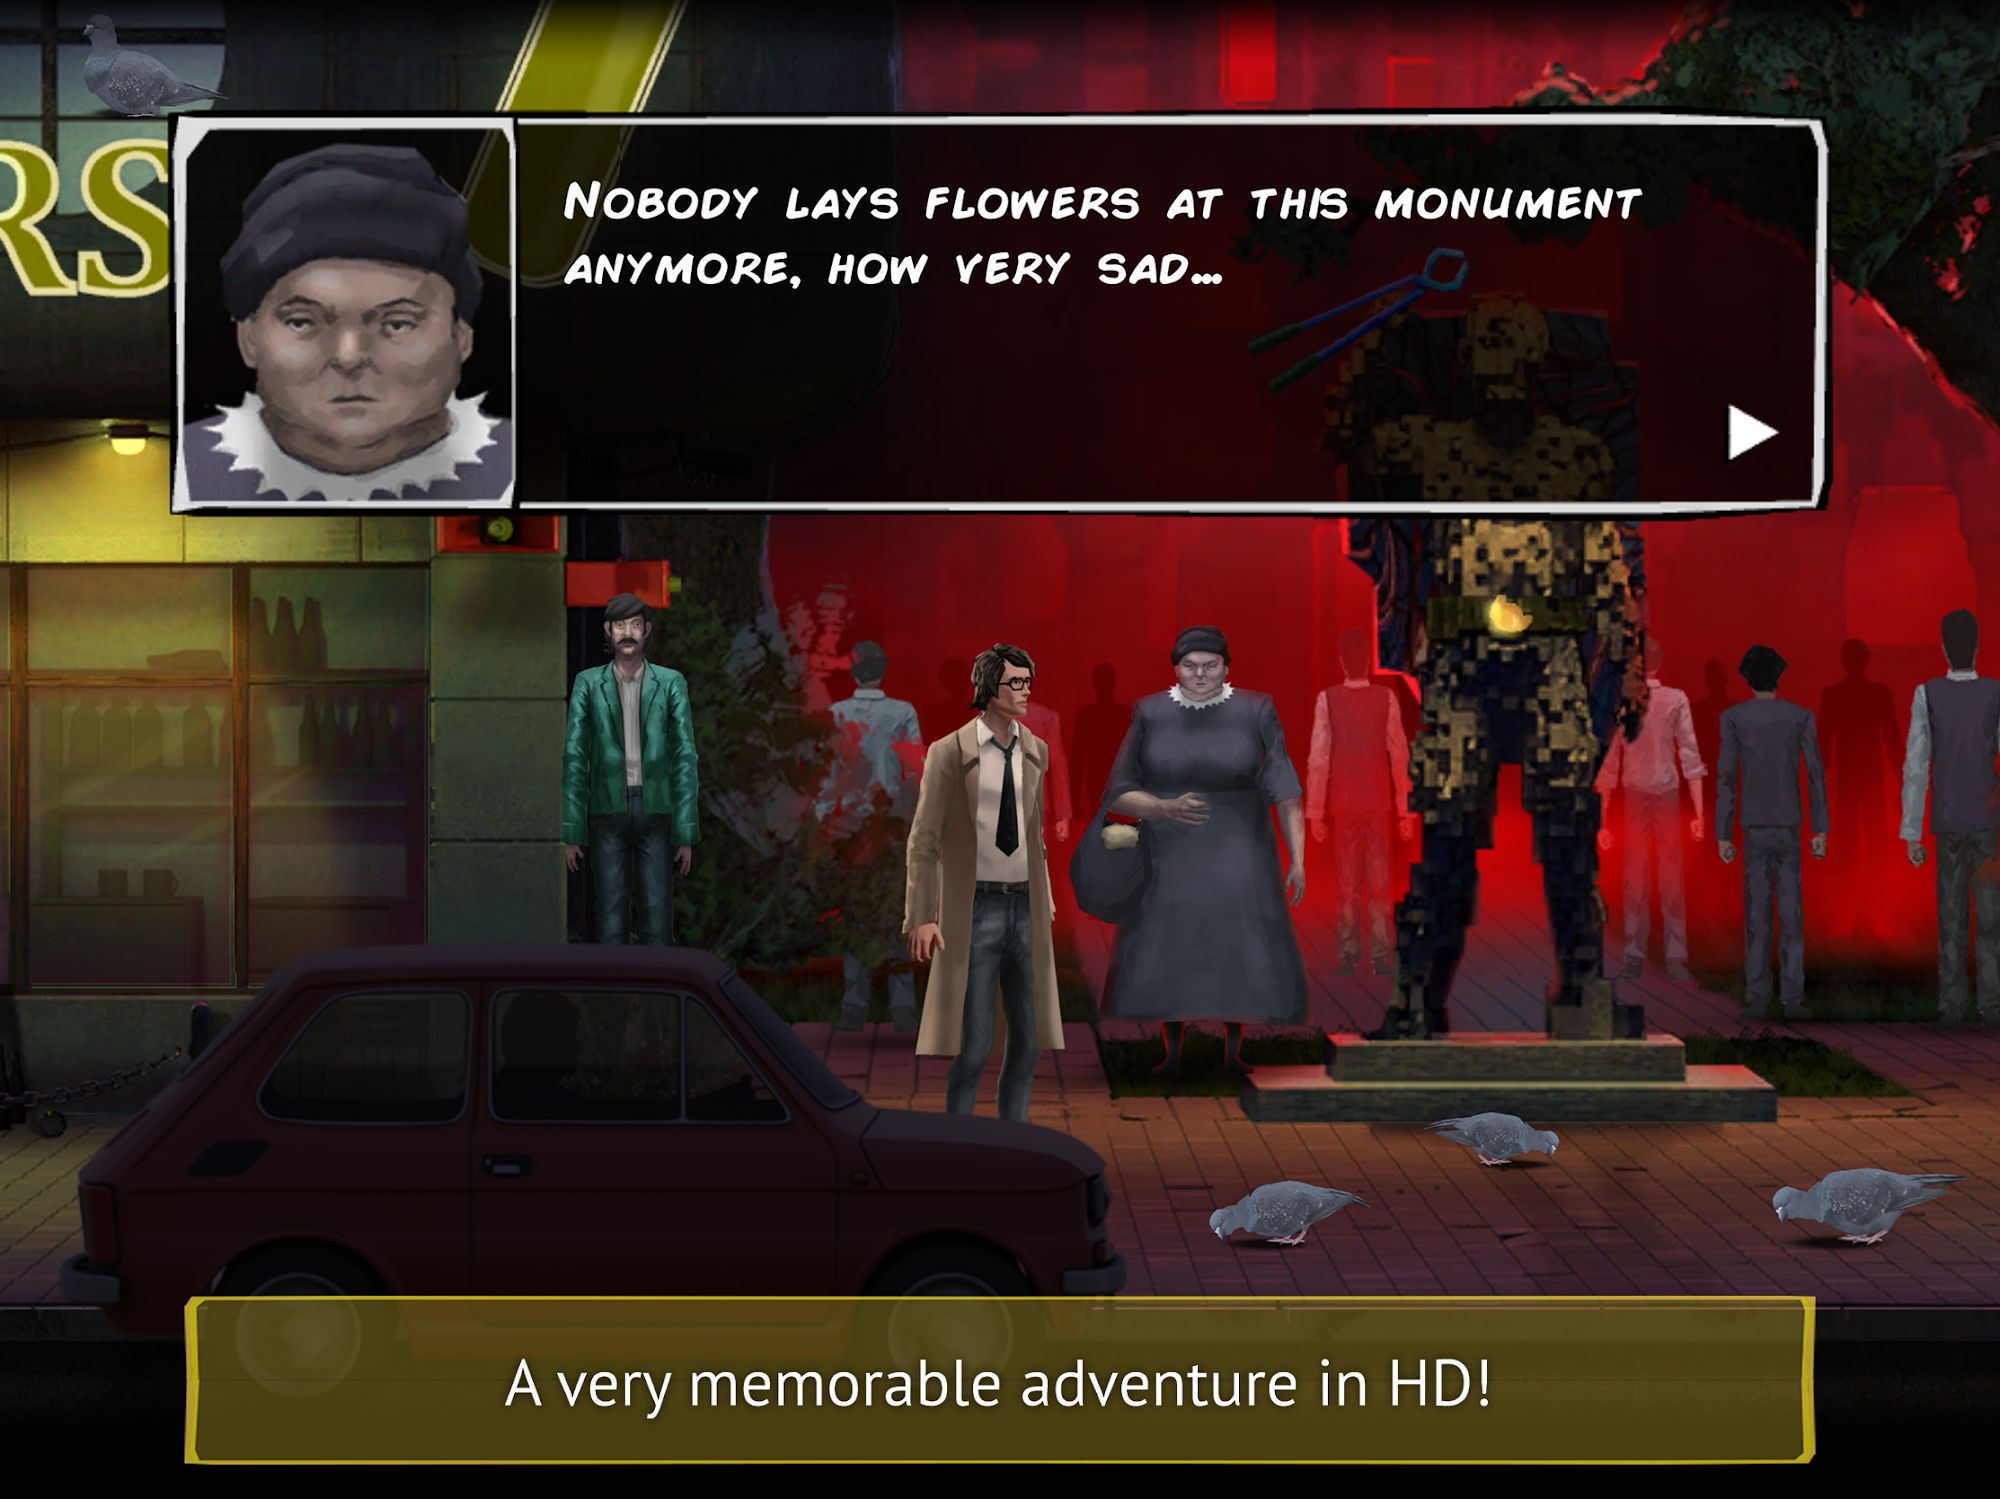 Unholy Adventure: point and click story game for Android